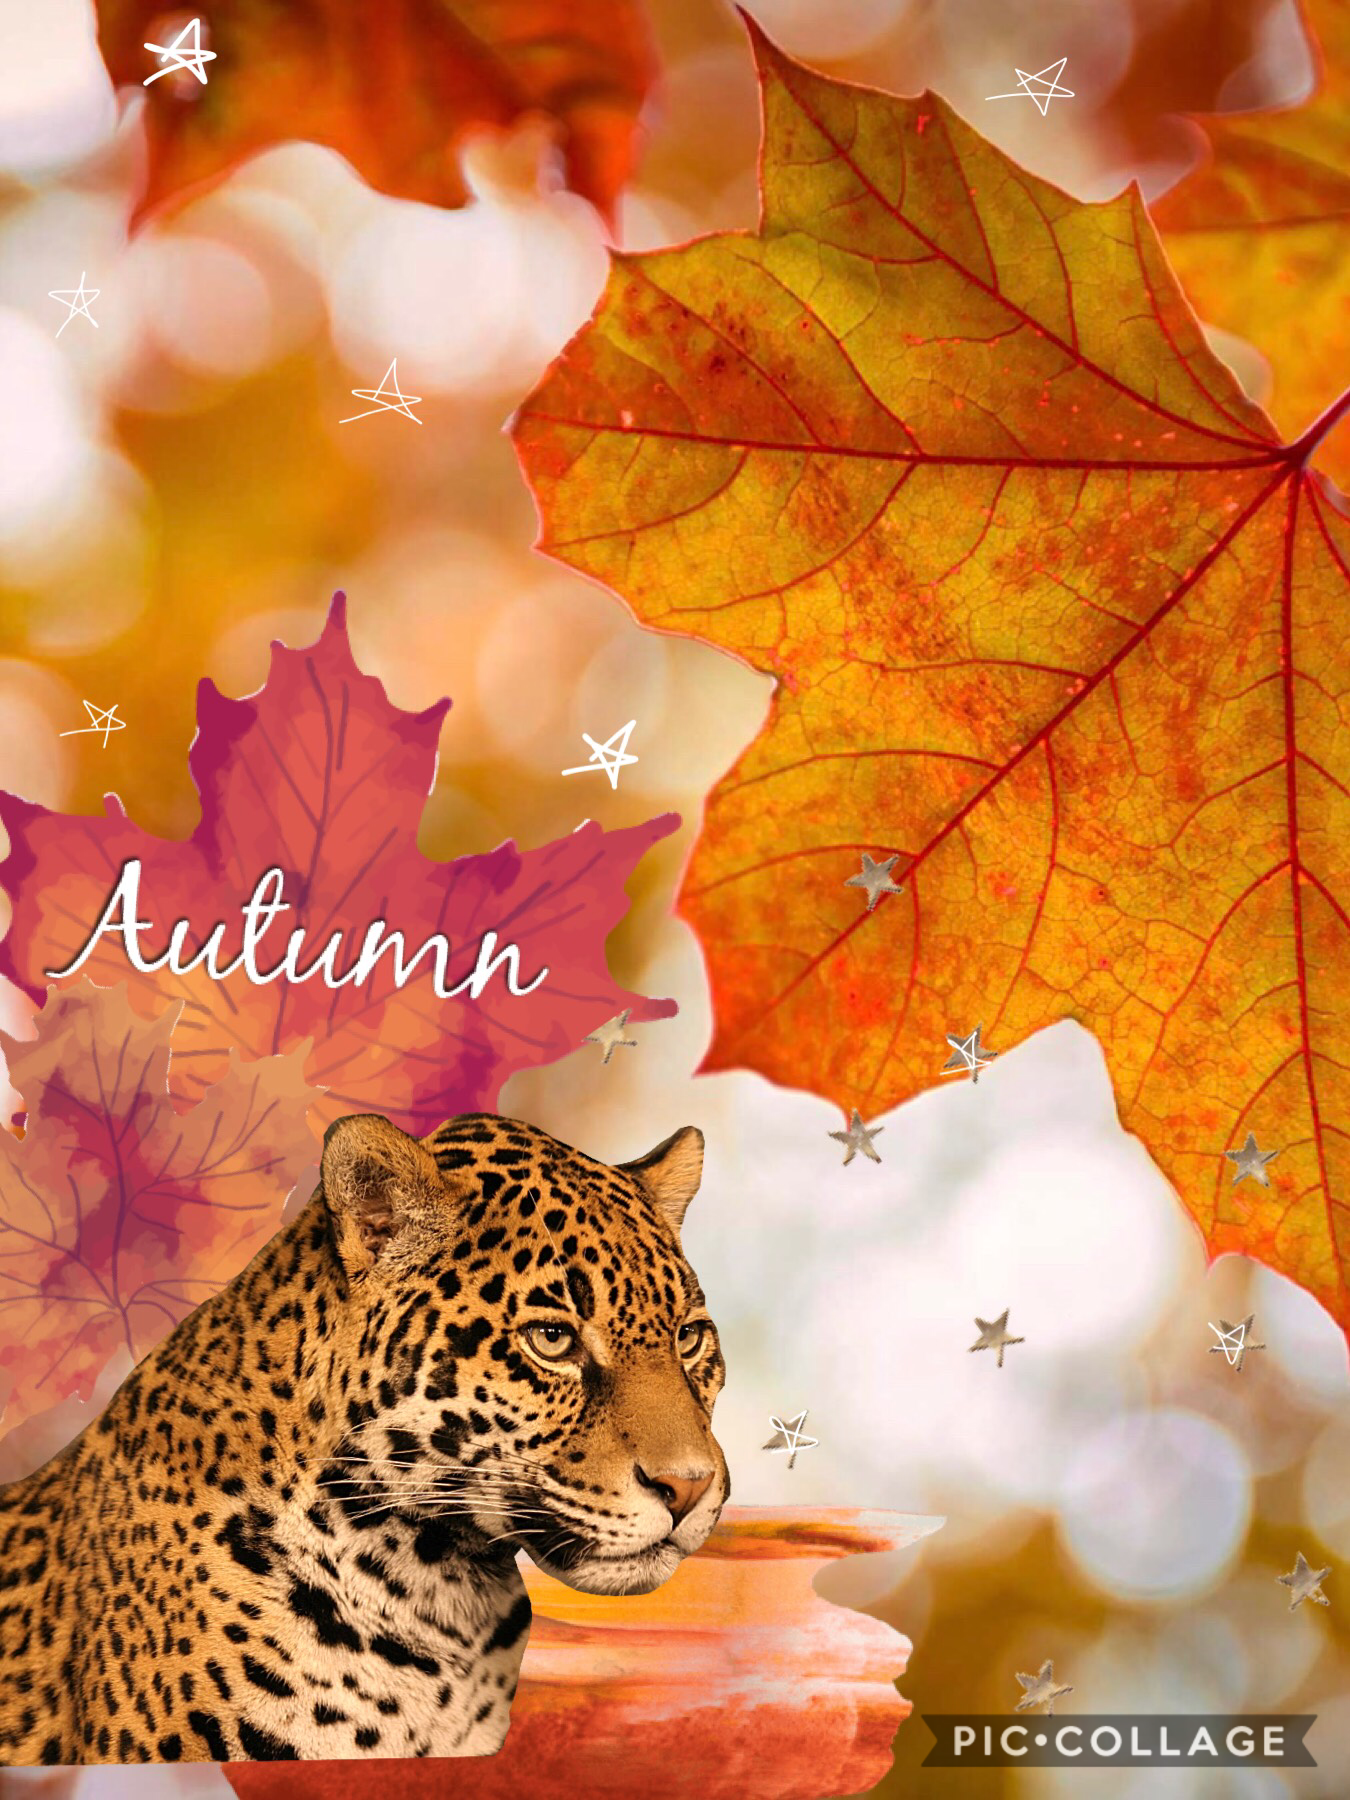 Autumn jag! Trying this out for the first time